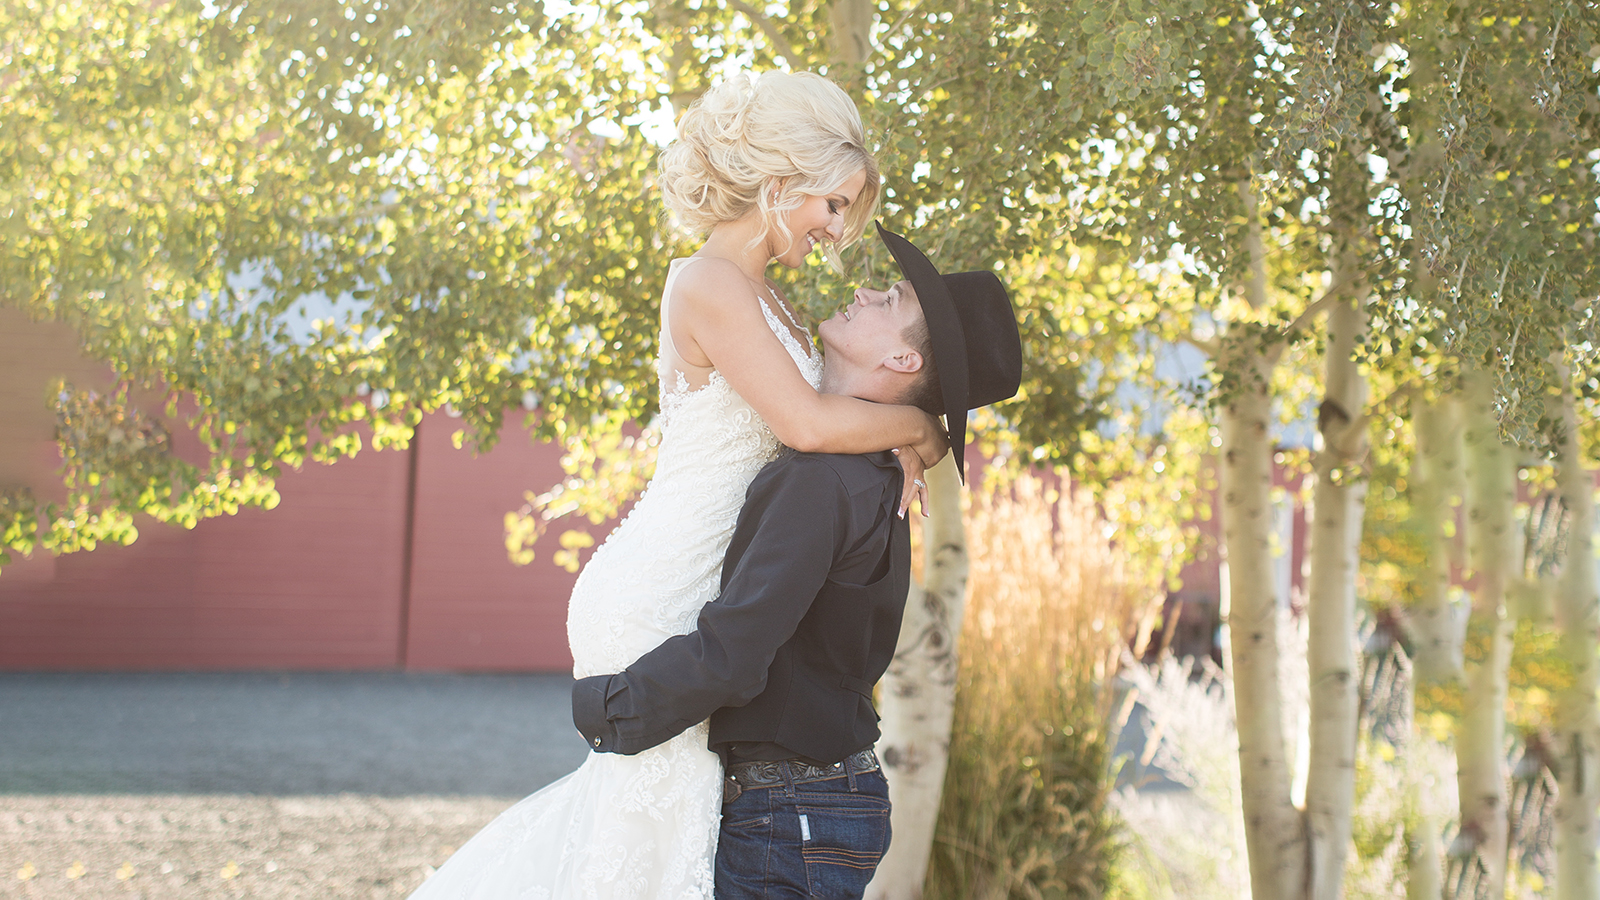 Romantic portrait of beautiful young bride and groom laughing un